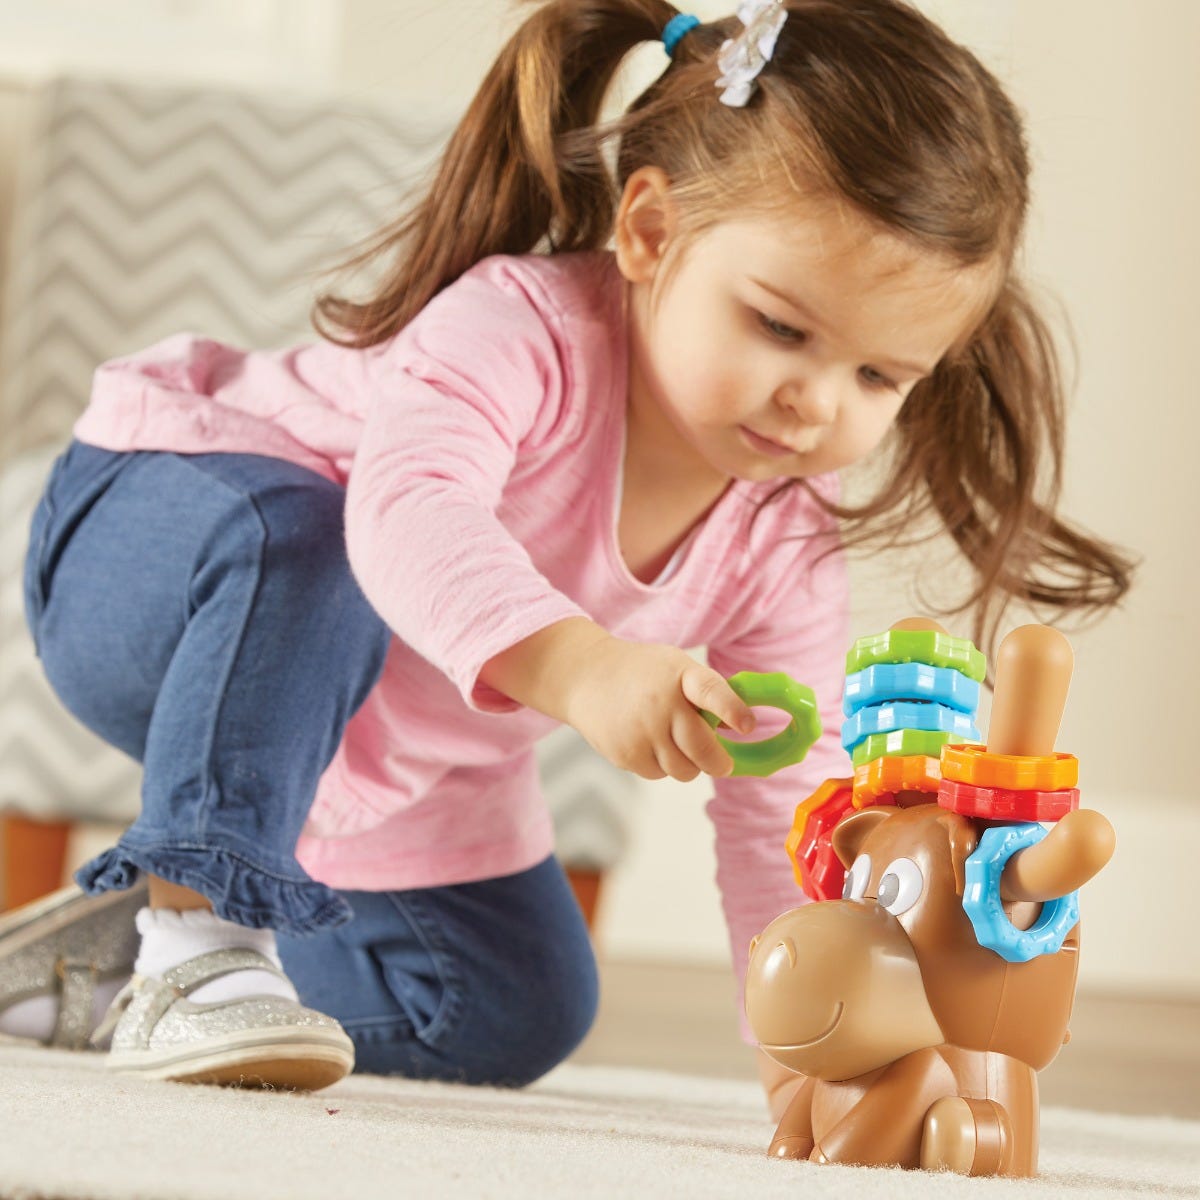 Max The Fine Motor Moose, Meet Max, your fine motor skills friend. This mighty moose comes with 12 grabbable rings featuring easy-to-grip surfaces that help toddlers build hand-eye coordination, hand strength and other essentials of fine motor skills development. Max’s 12 rings feature two different textures that support tactile play, and early colour learning skills. Max The Fine Motor Moose Children build the hand strength and other essential fine motor skills every time they play with adorable Max. The f